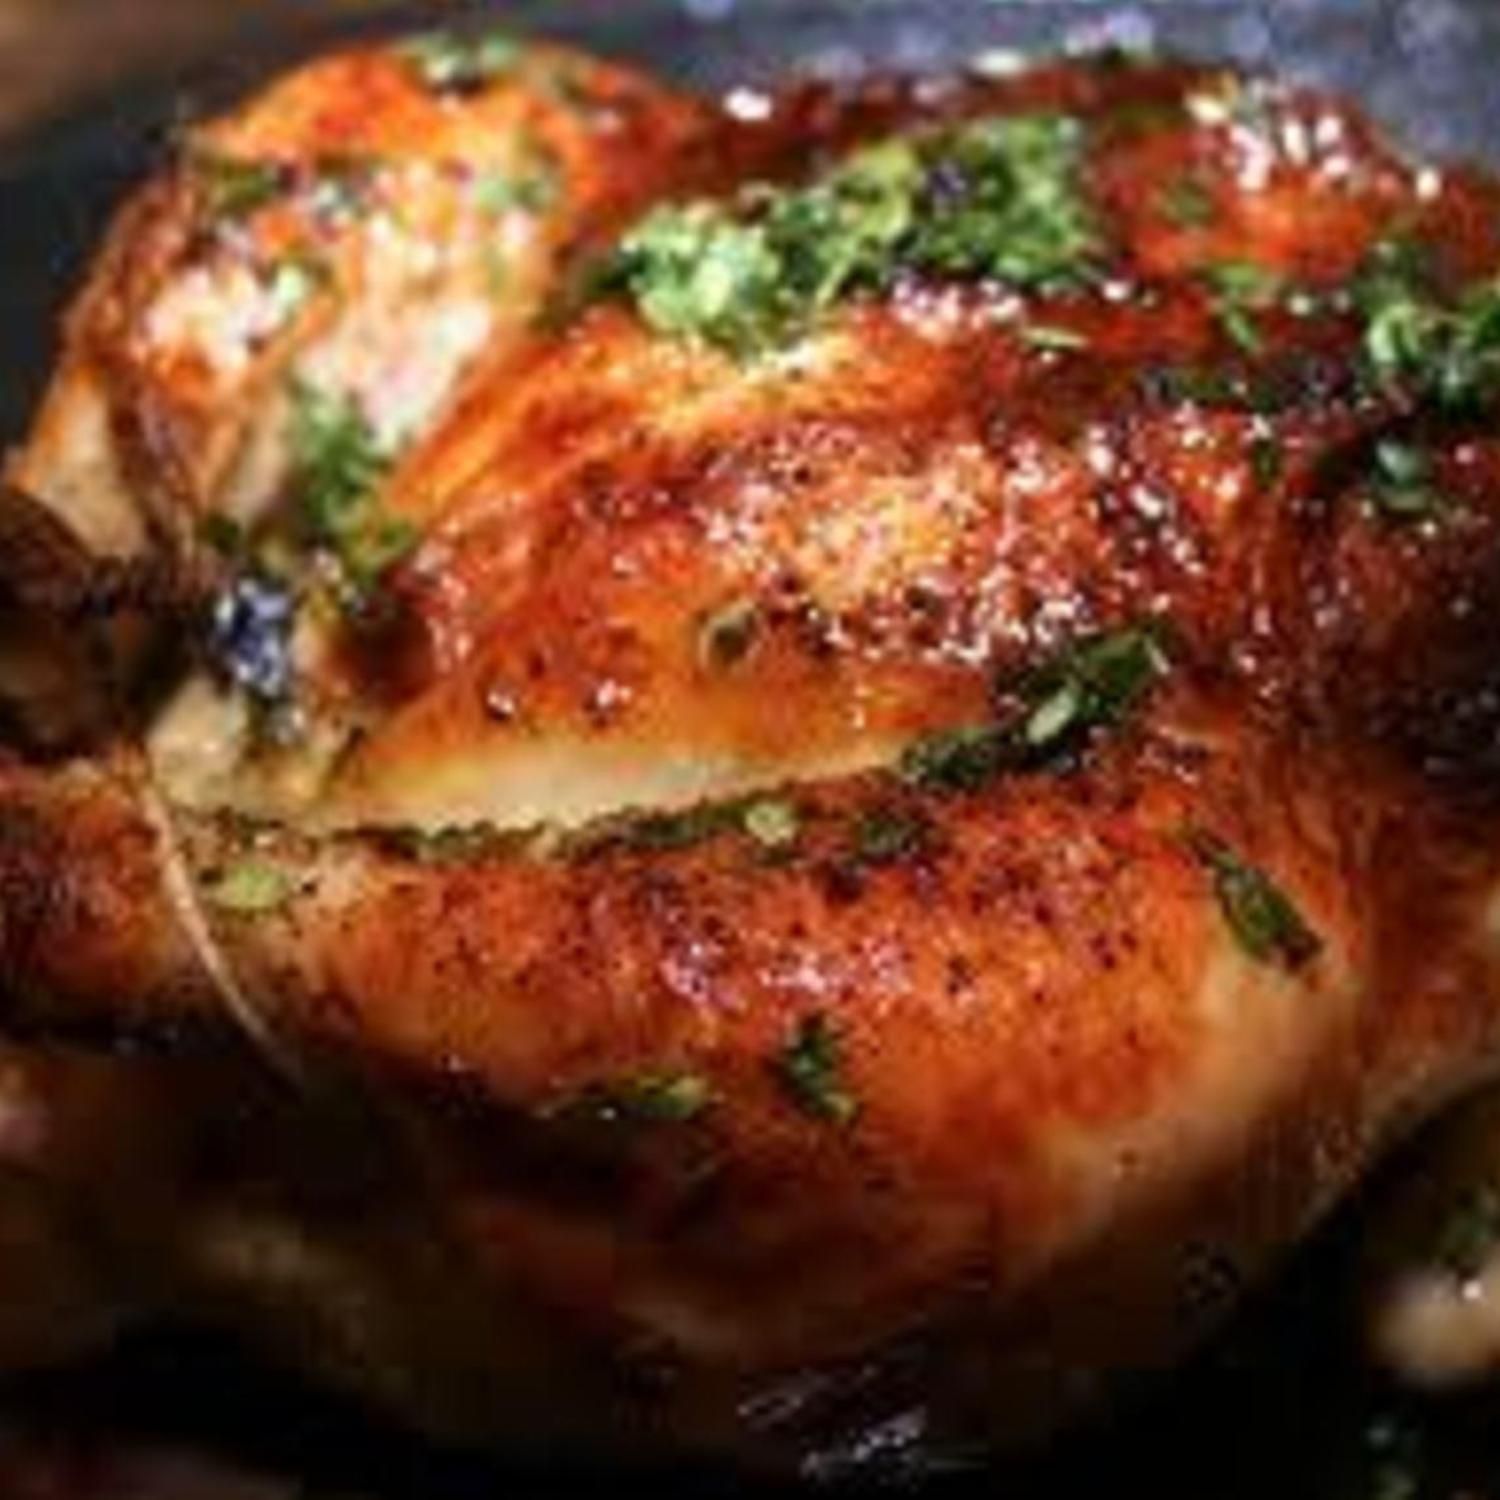 how to roast a chicken to juicy perfection. Note to myself – it takes at least 30 minutes less time than shown.